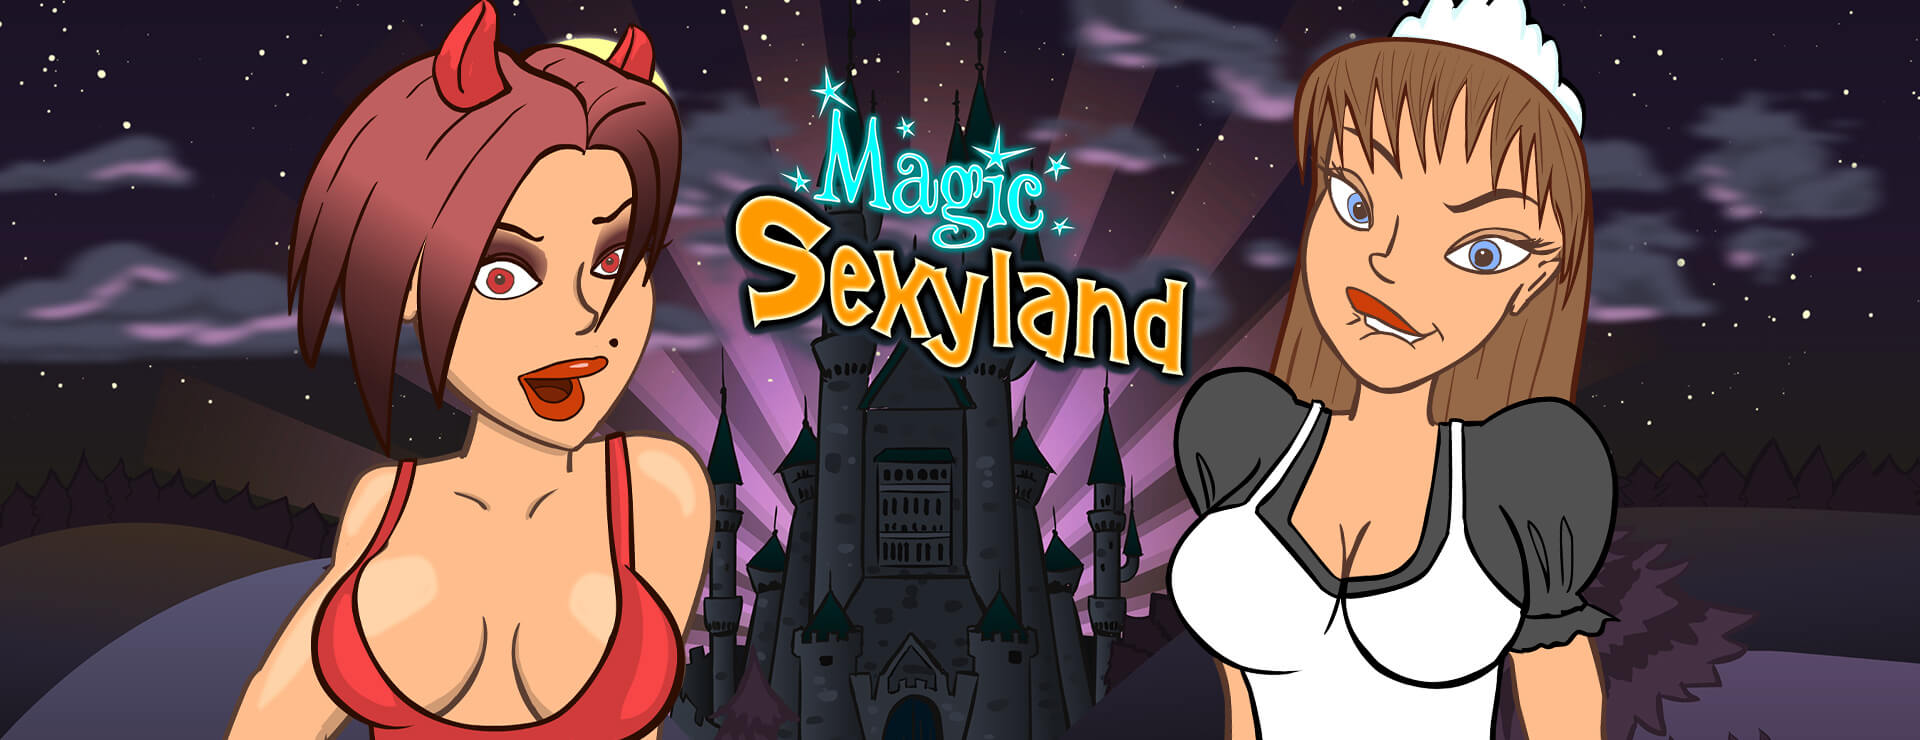 Magic Sexyland - Casual Game